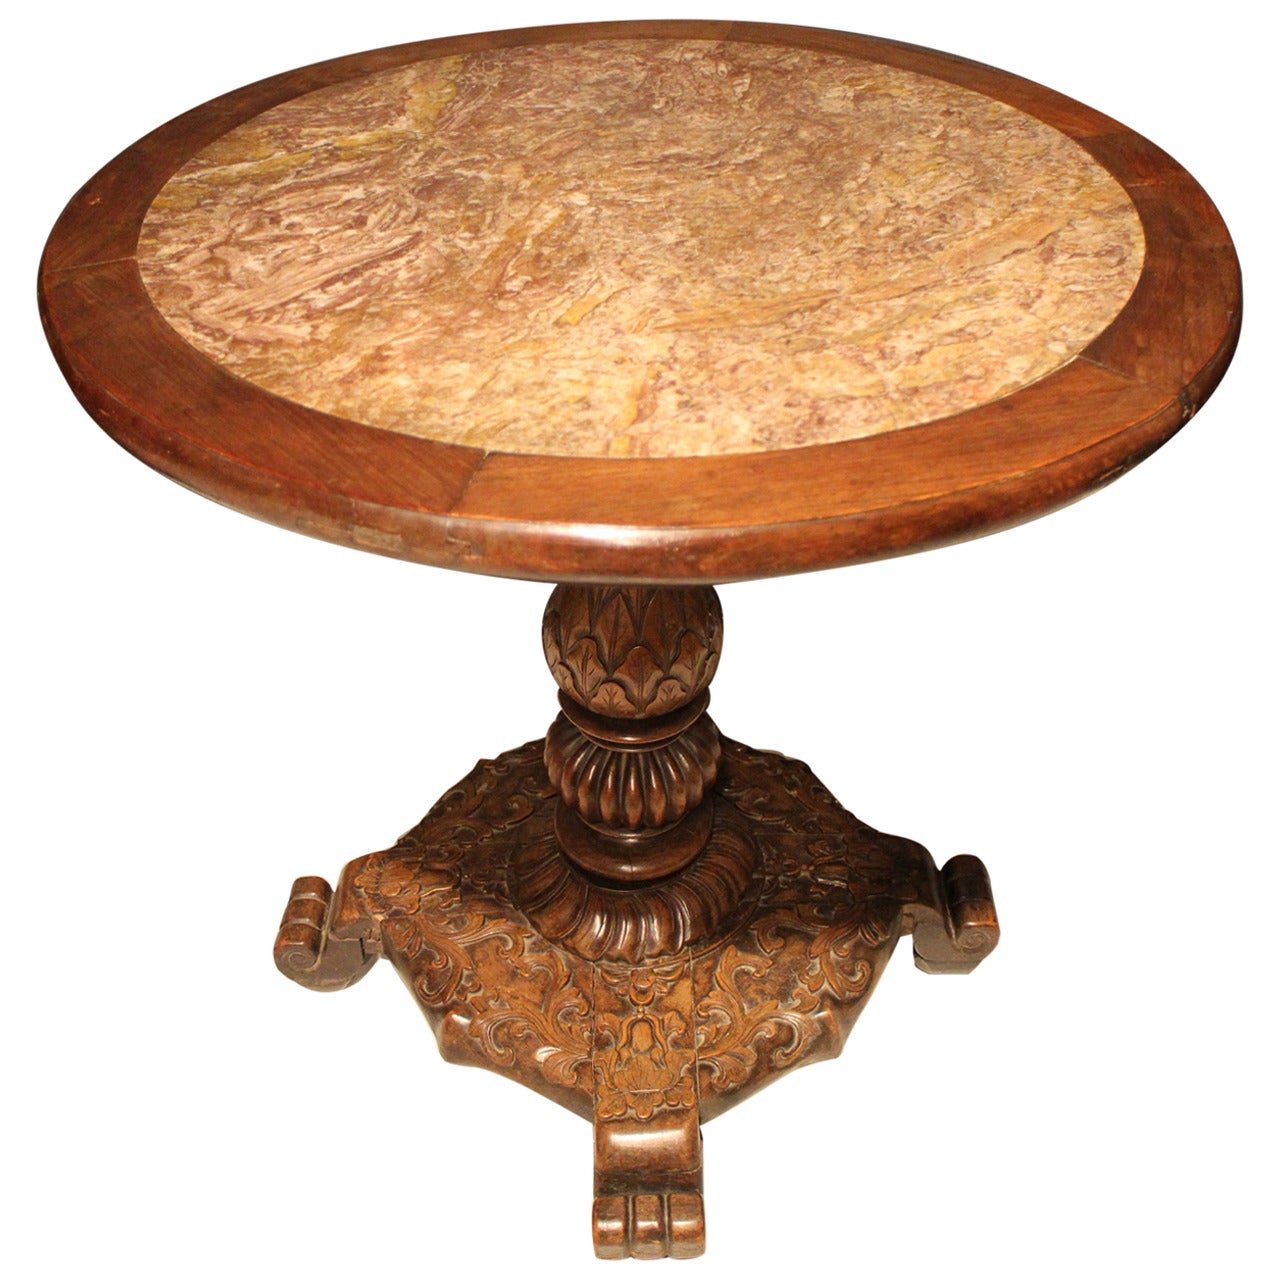 Medium Size Chinese Marble-Top Round Table For Sale